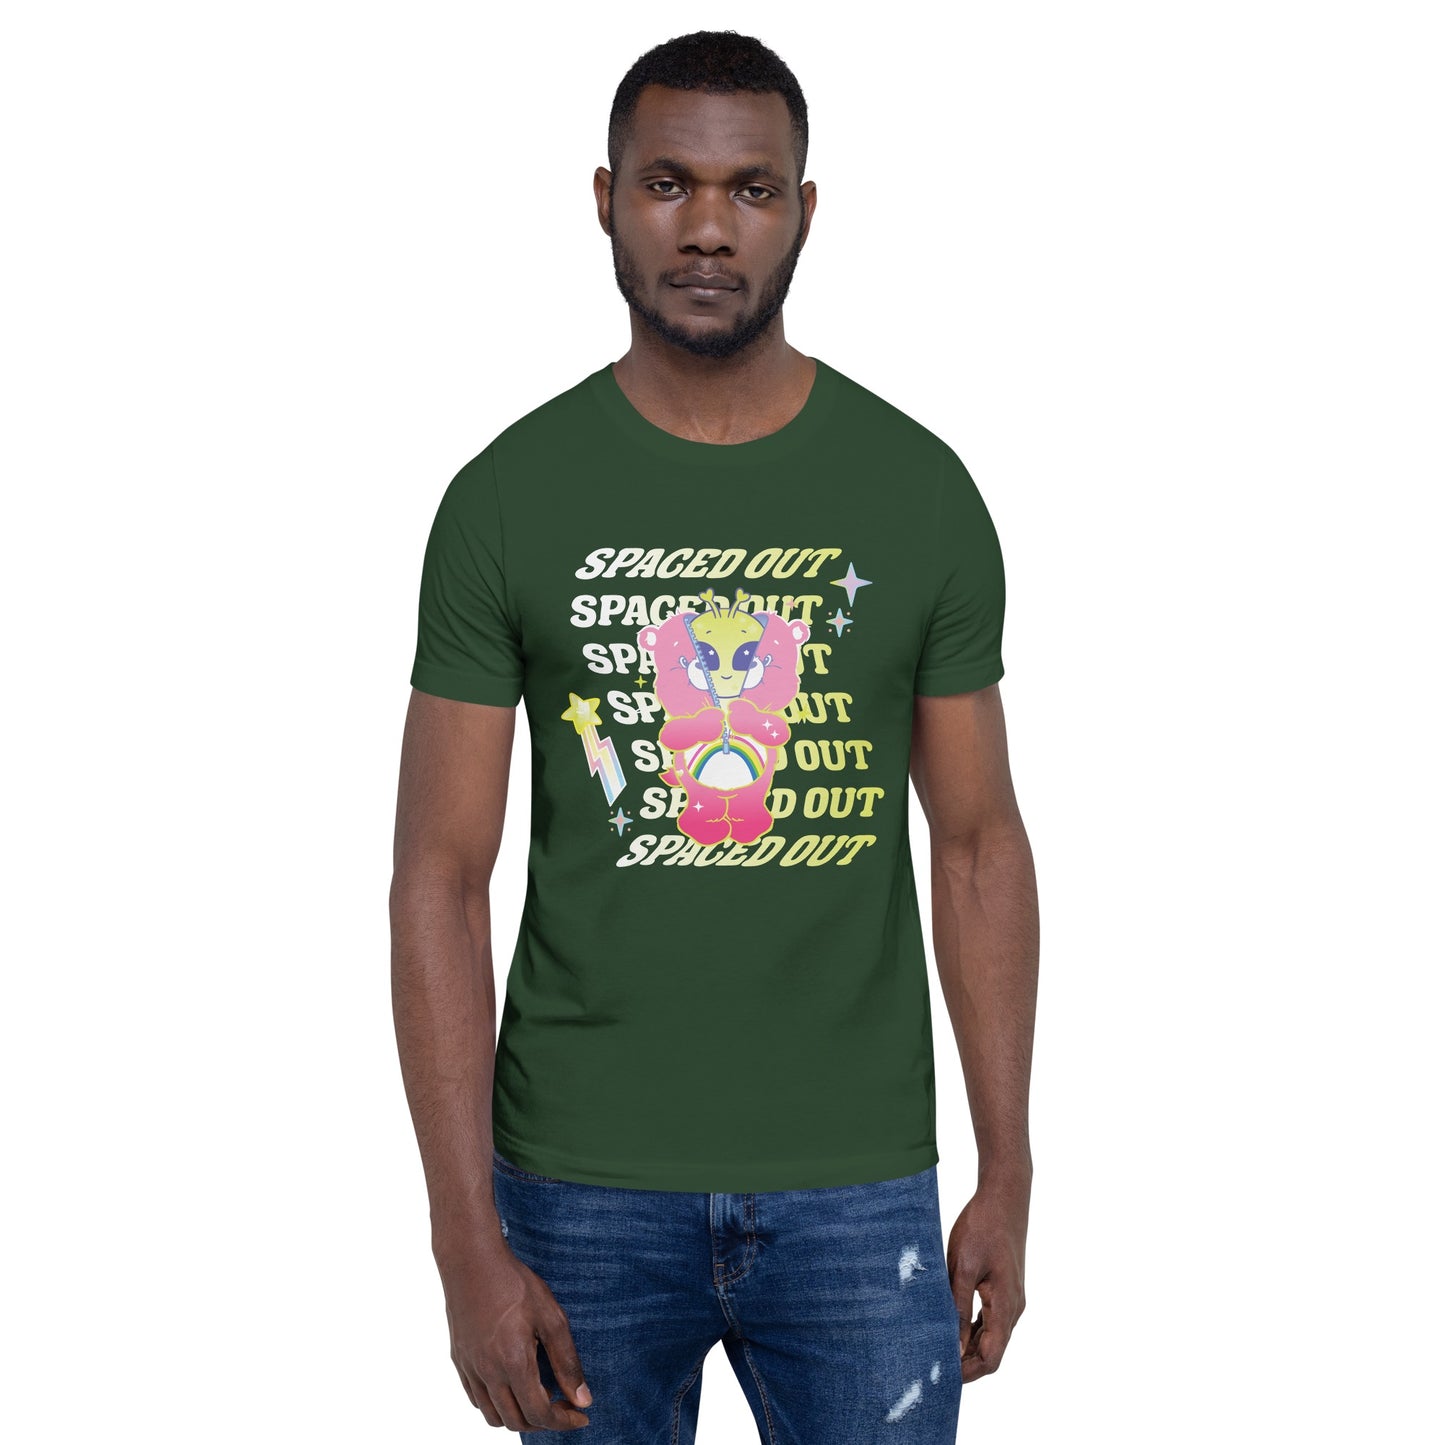 Care Bears Spaced Out Adult T-Shirt